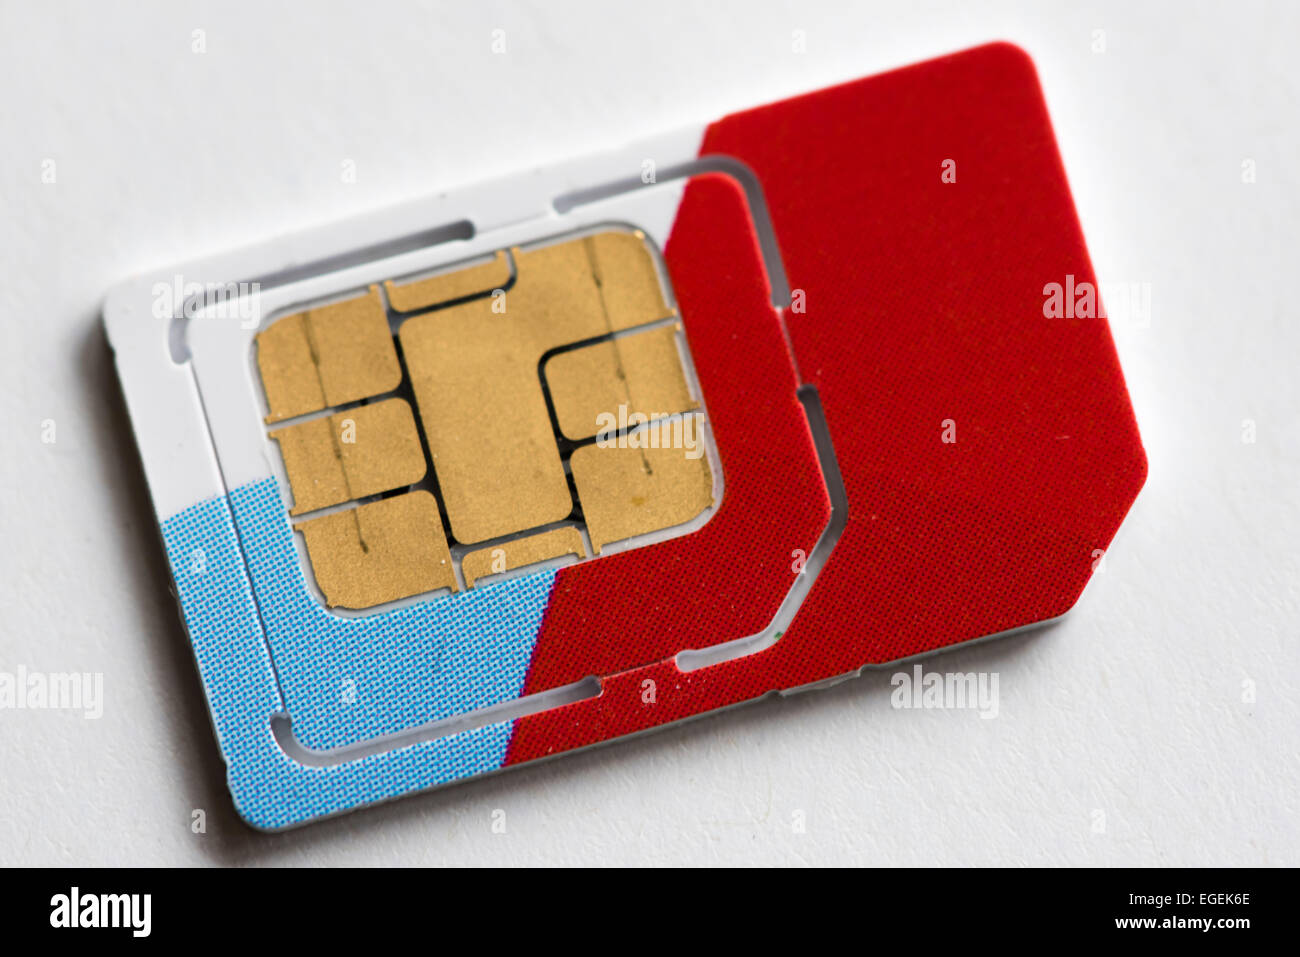 Close up of a SIM-card (subscriber identity module card) for mobile phones. Stock Photo